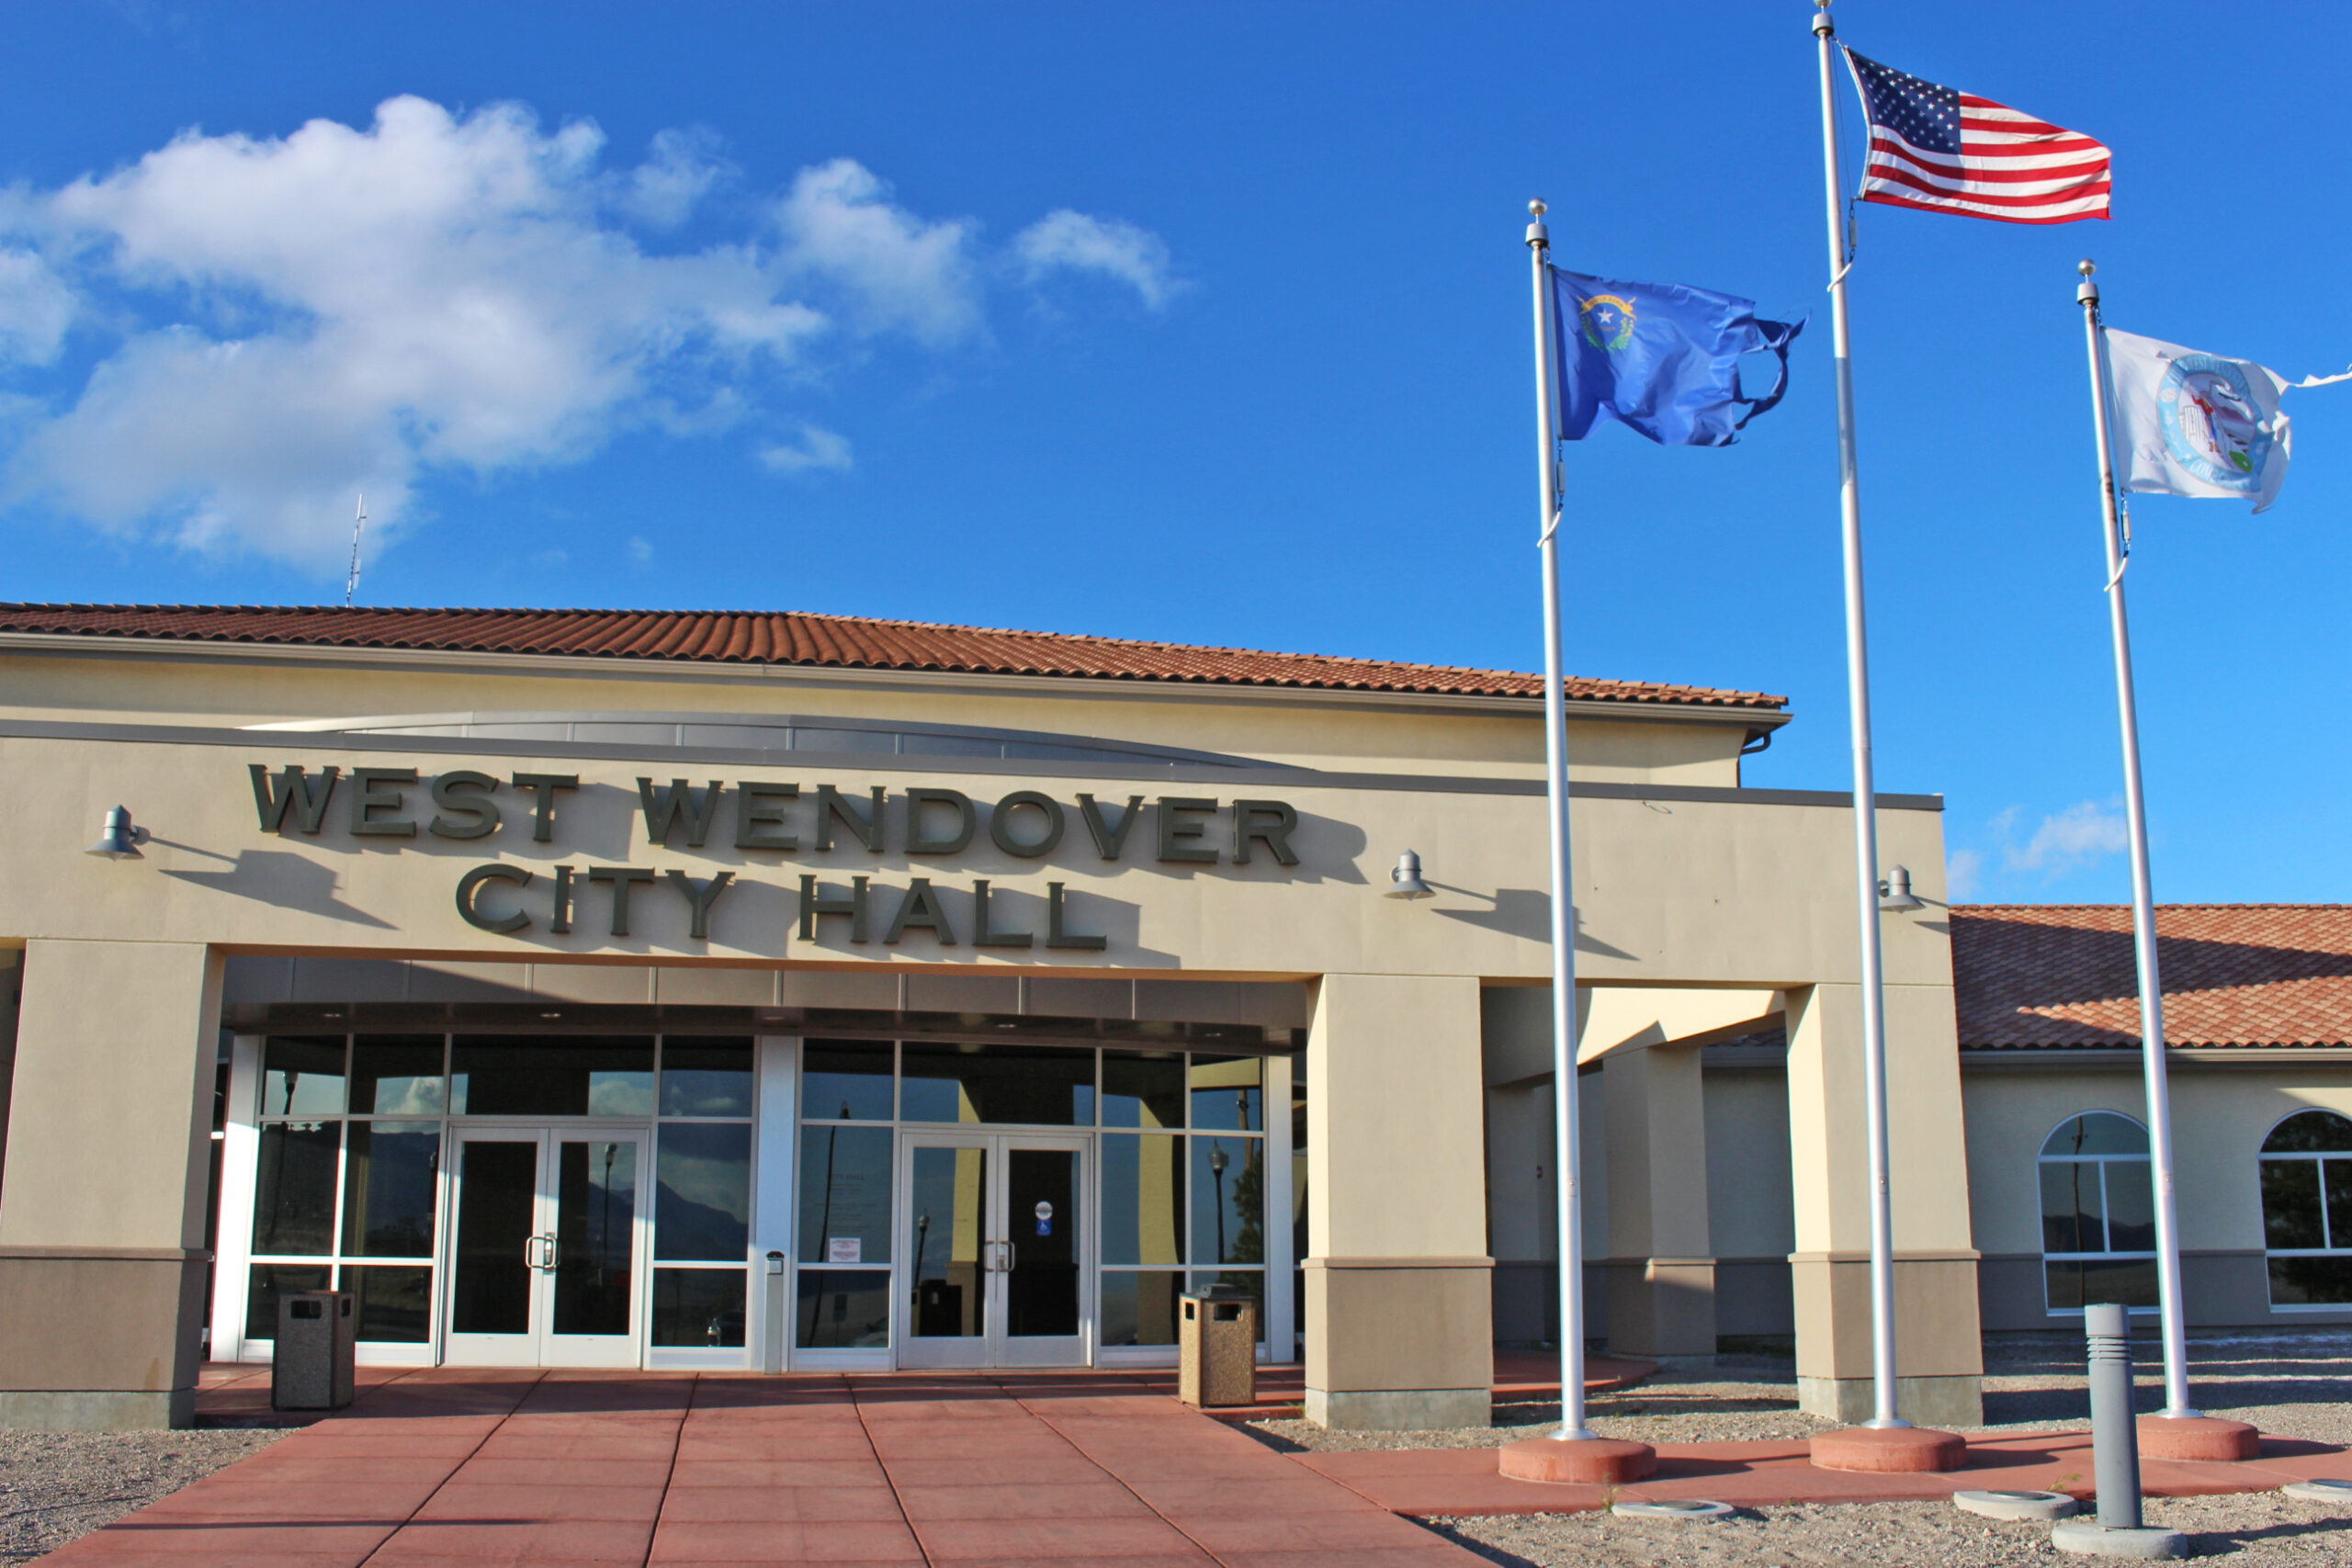 An exterior view of West Wendover City Hall.